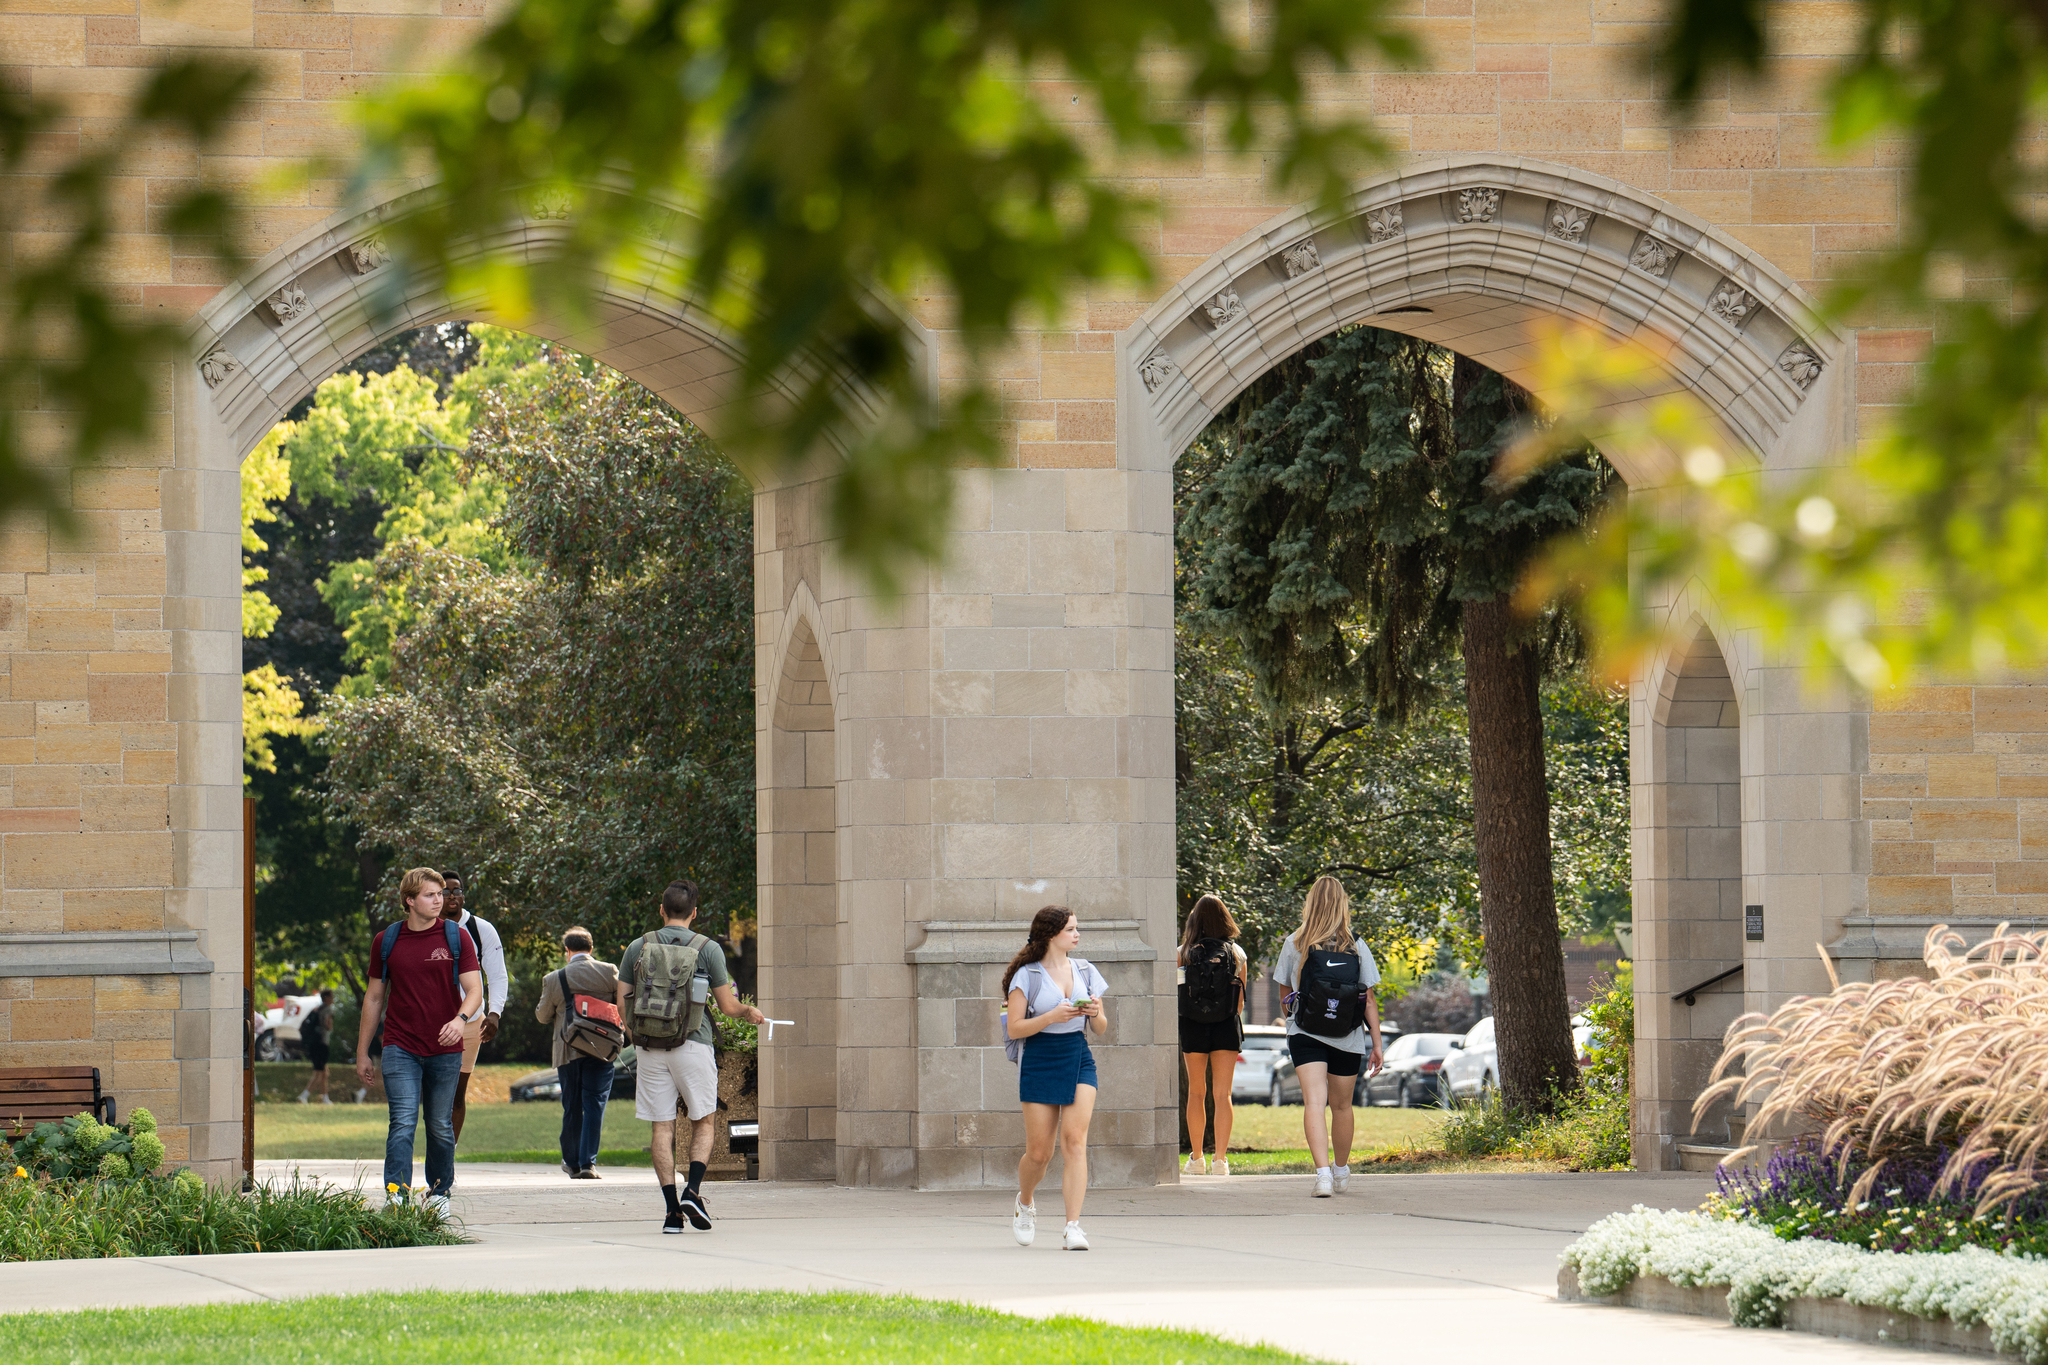 Students walk through the Arches on a nice fall day